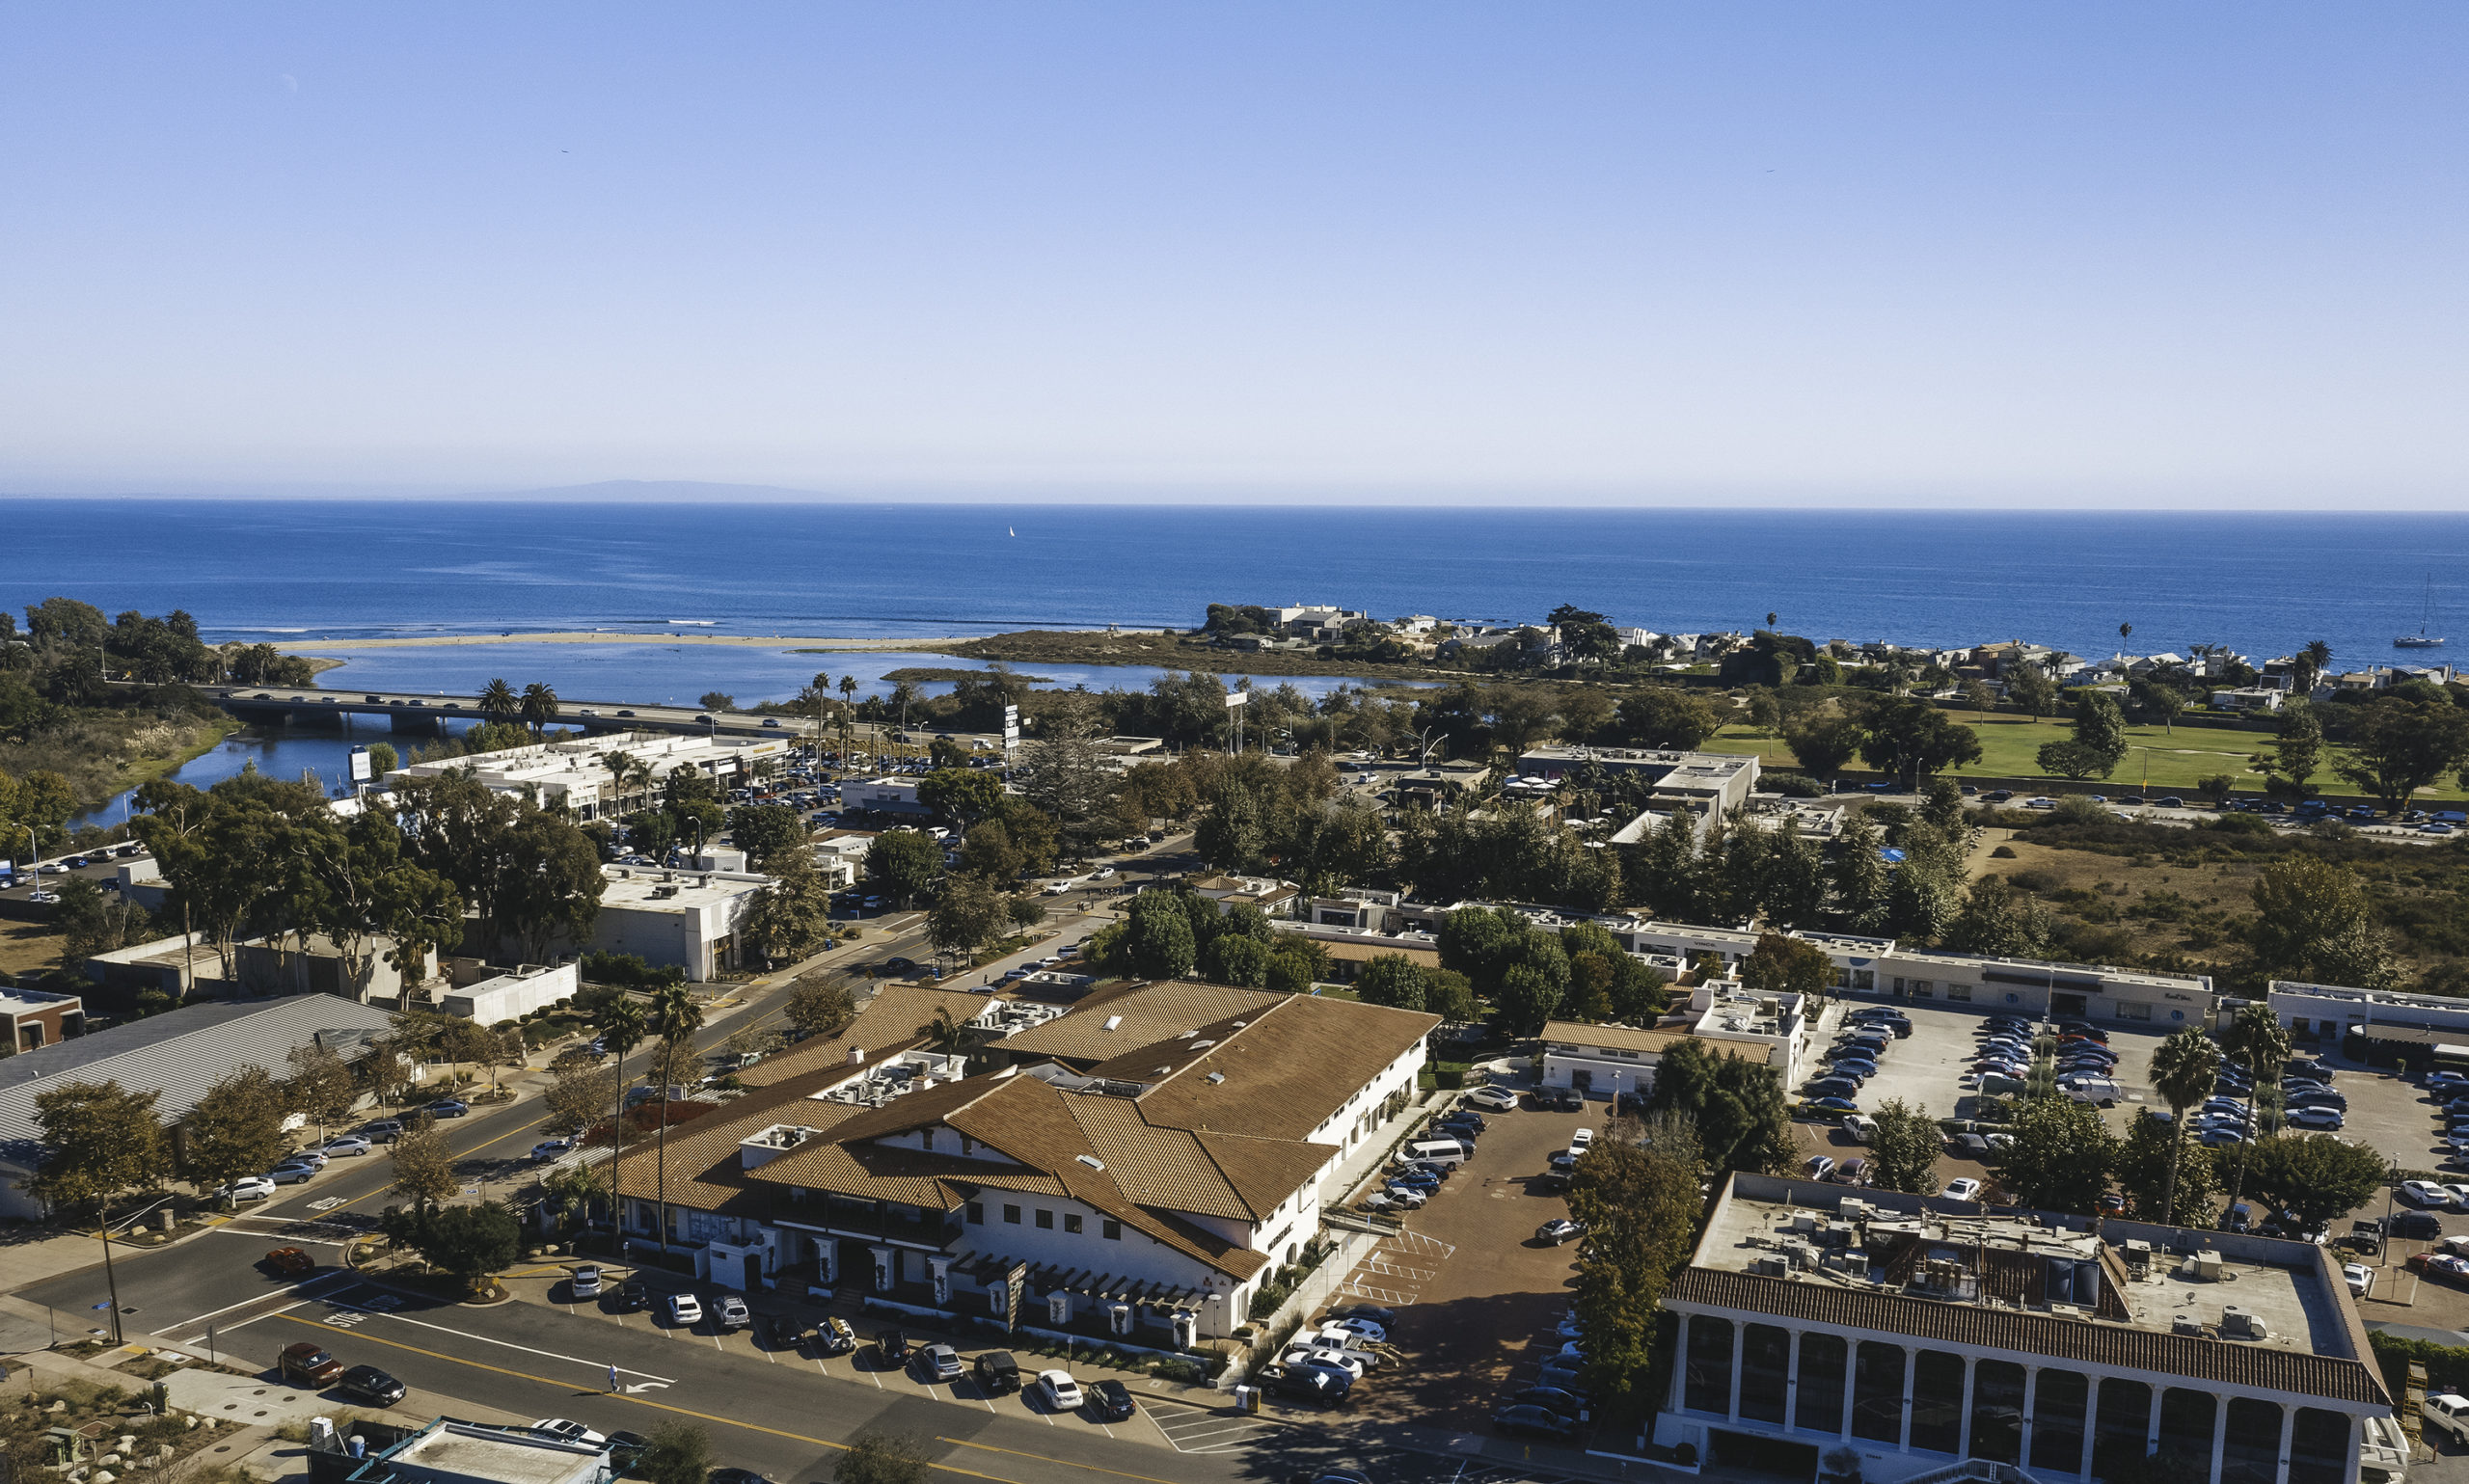 Malibu Country Mart is located a half mile west of the Malibu Pier in a picturesque setting.